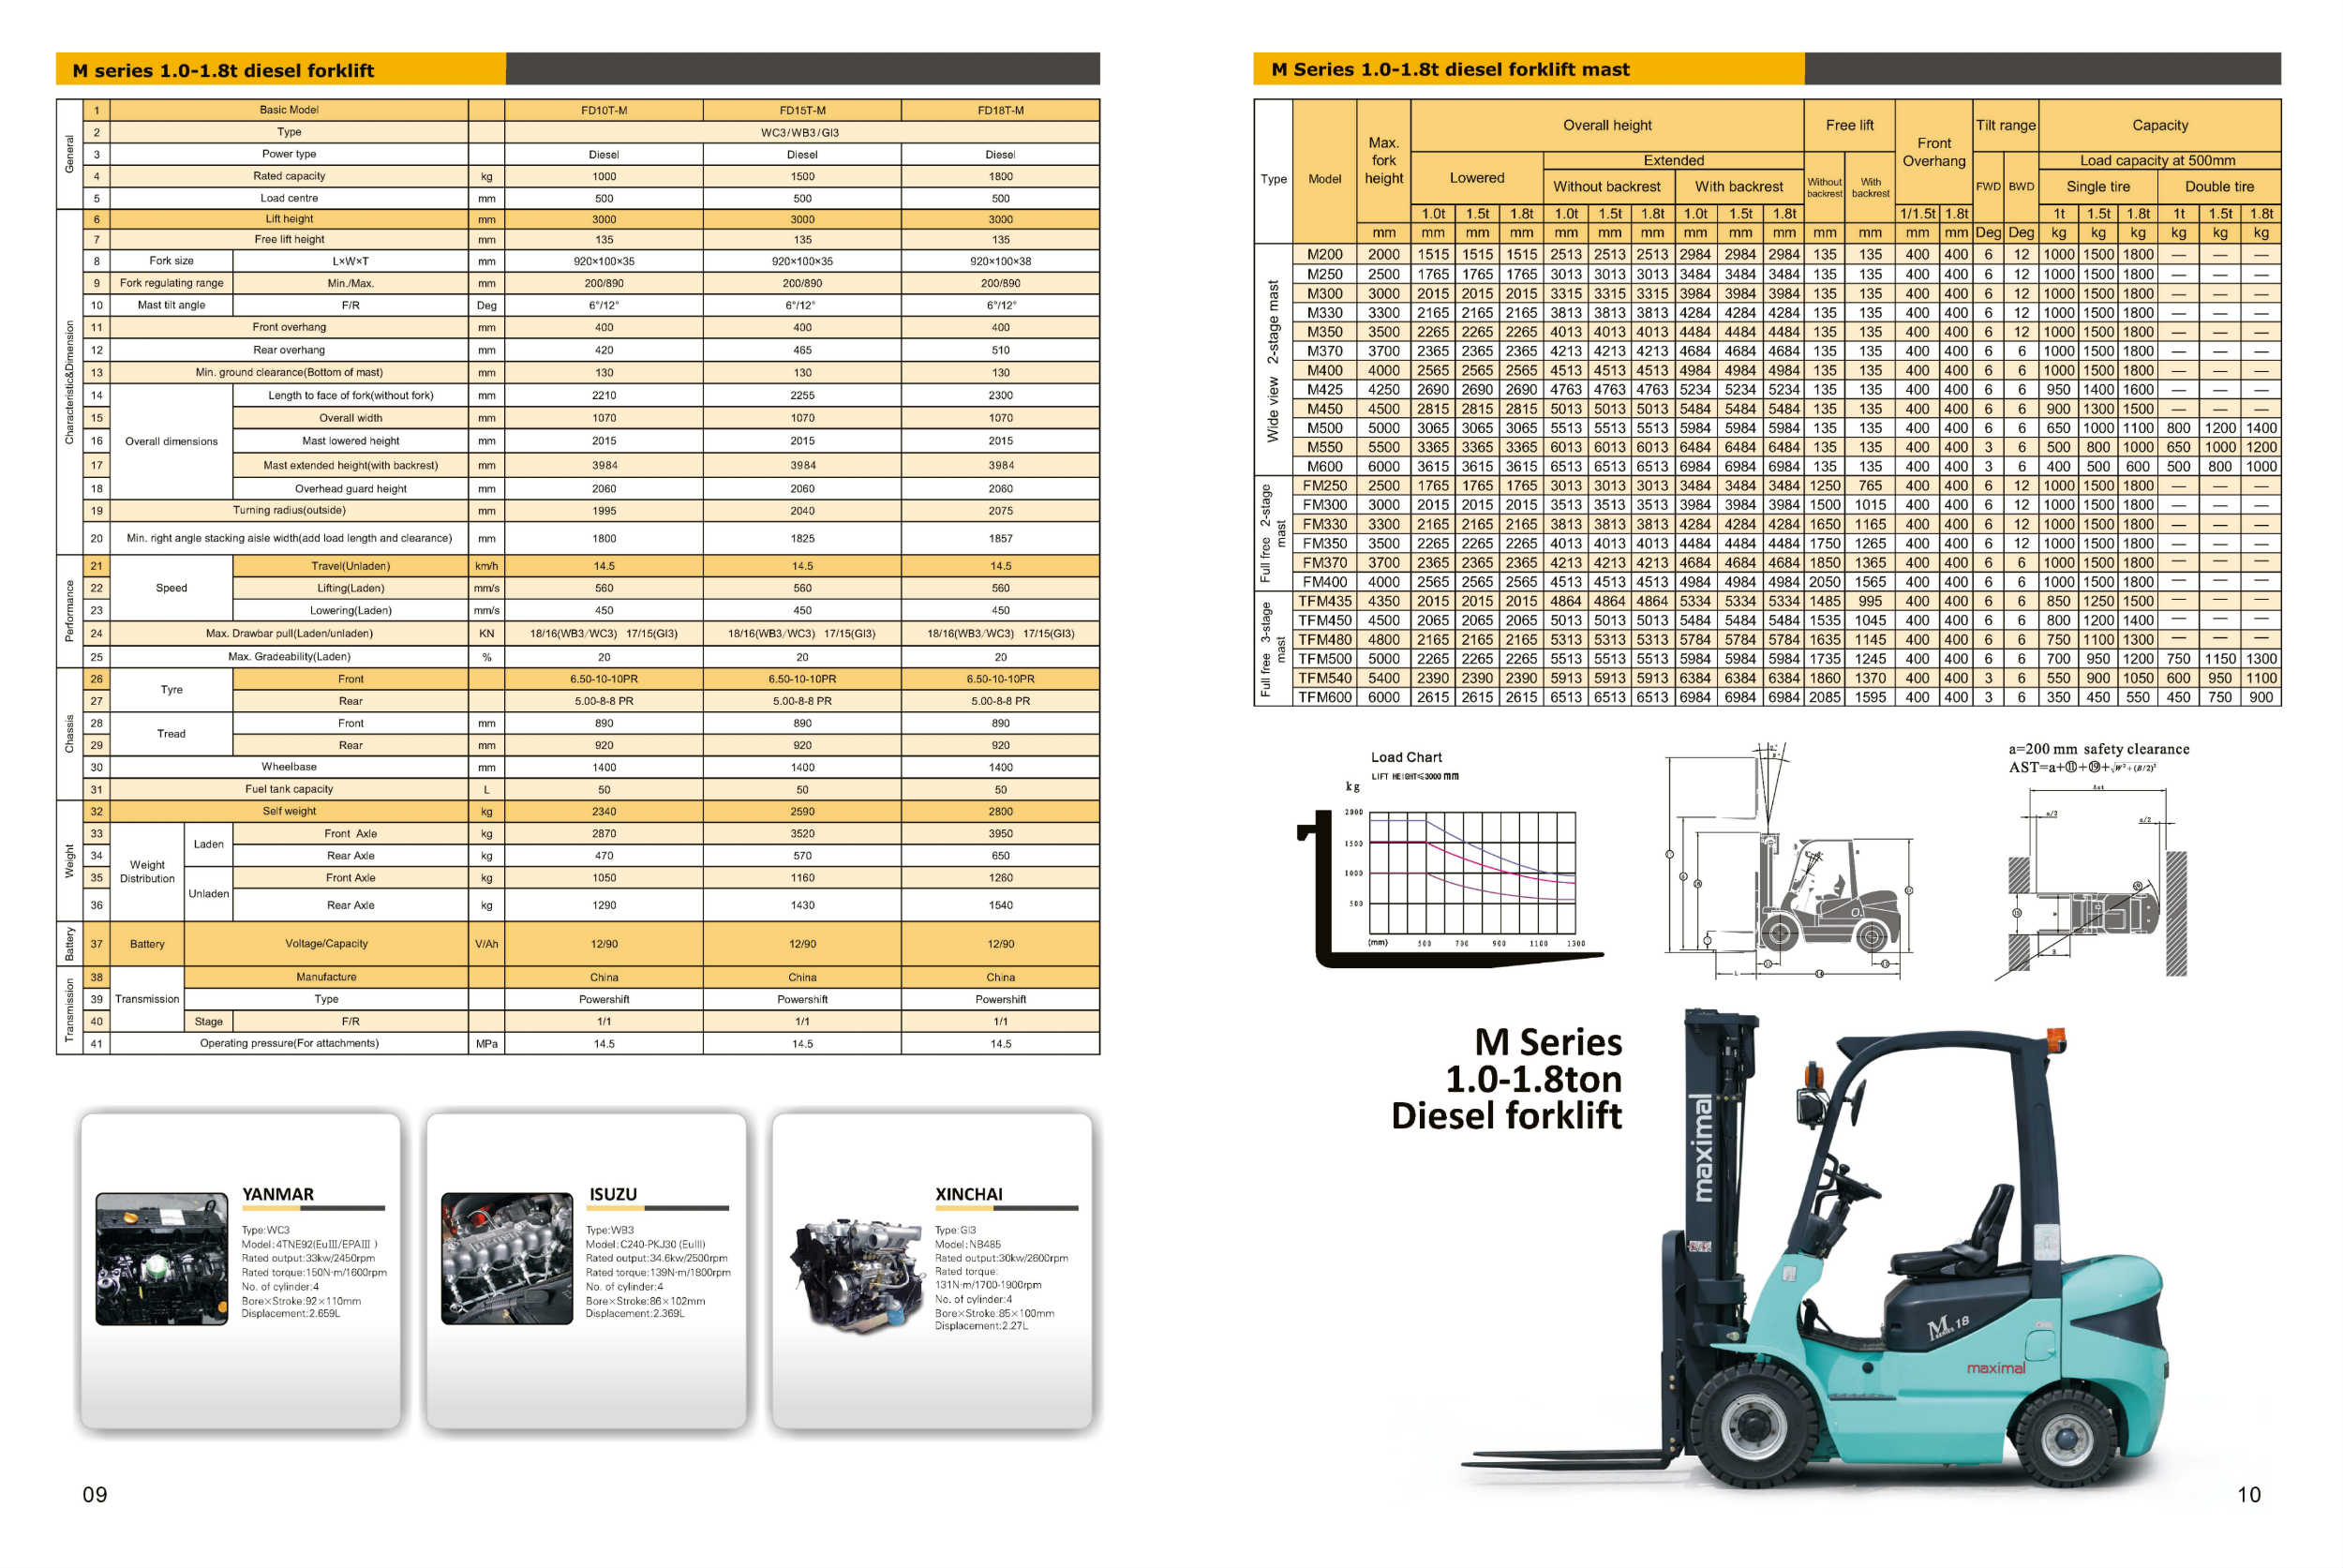 1.8 Tonne Maximal Diesel Forklift Specifications